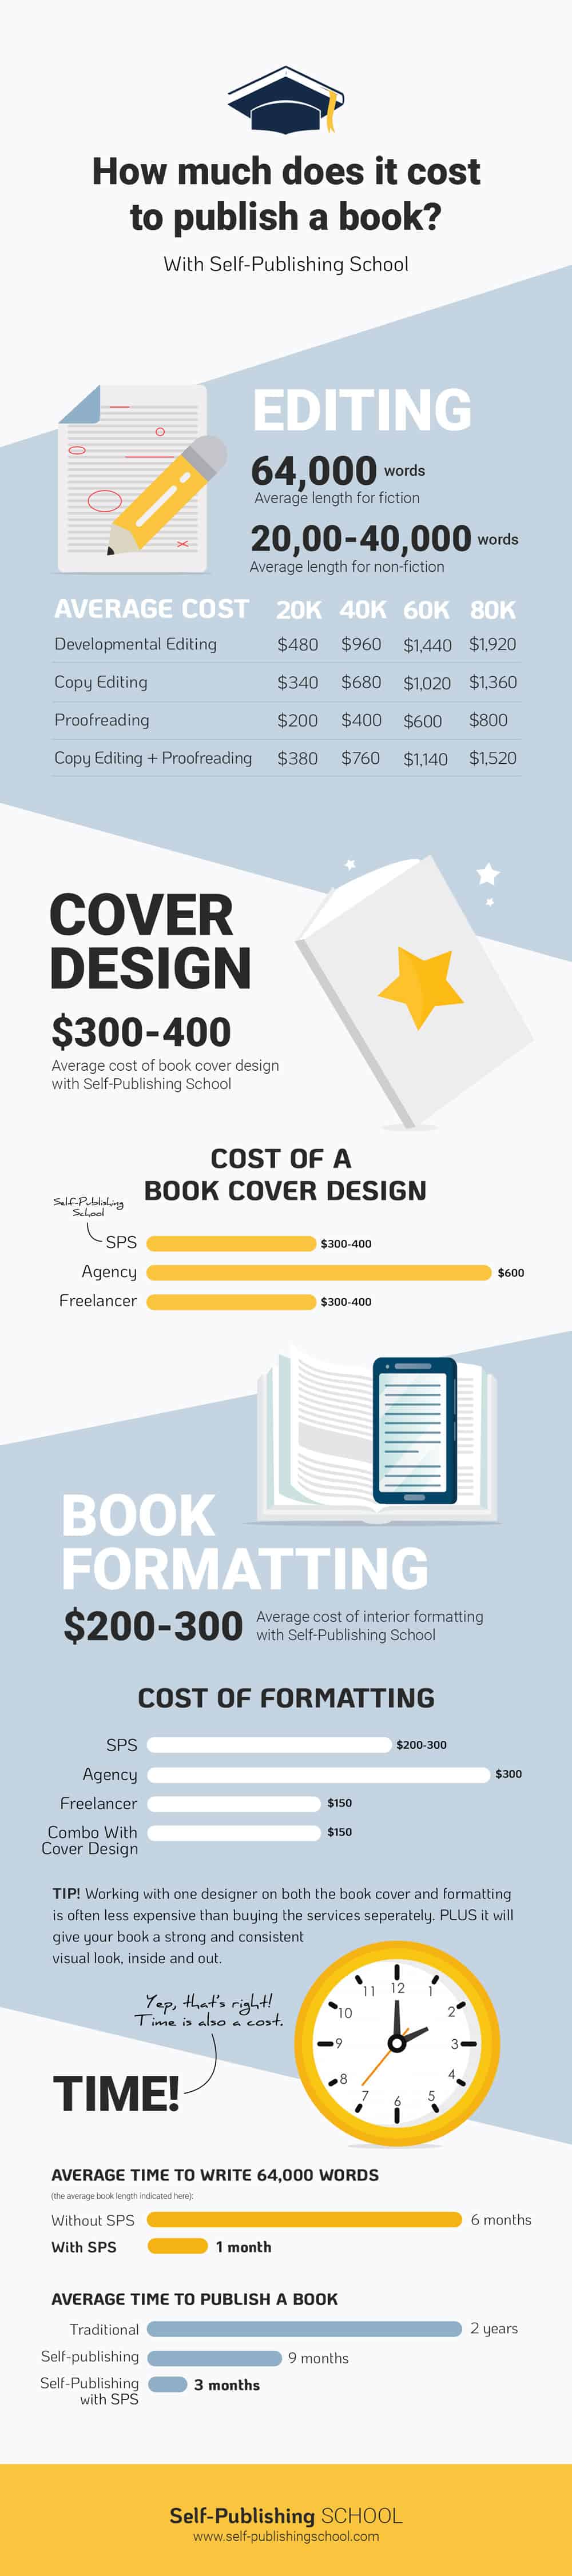 cost to publish